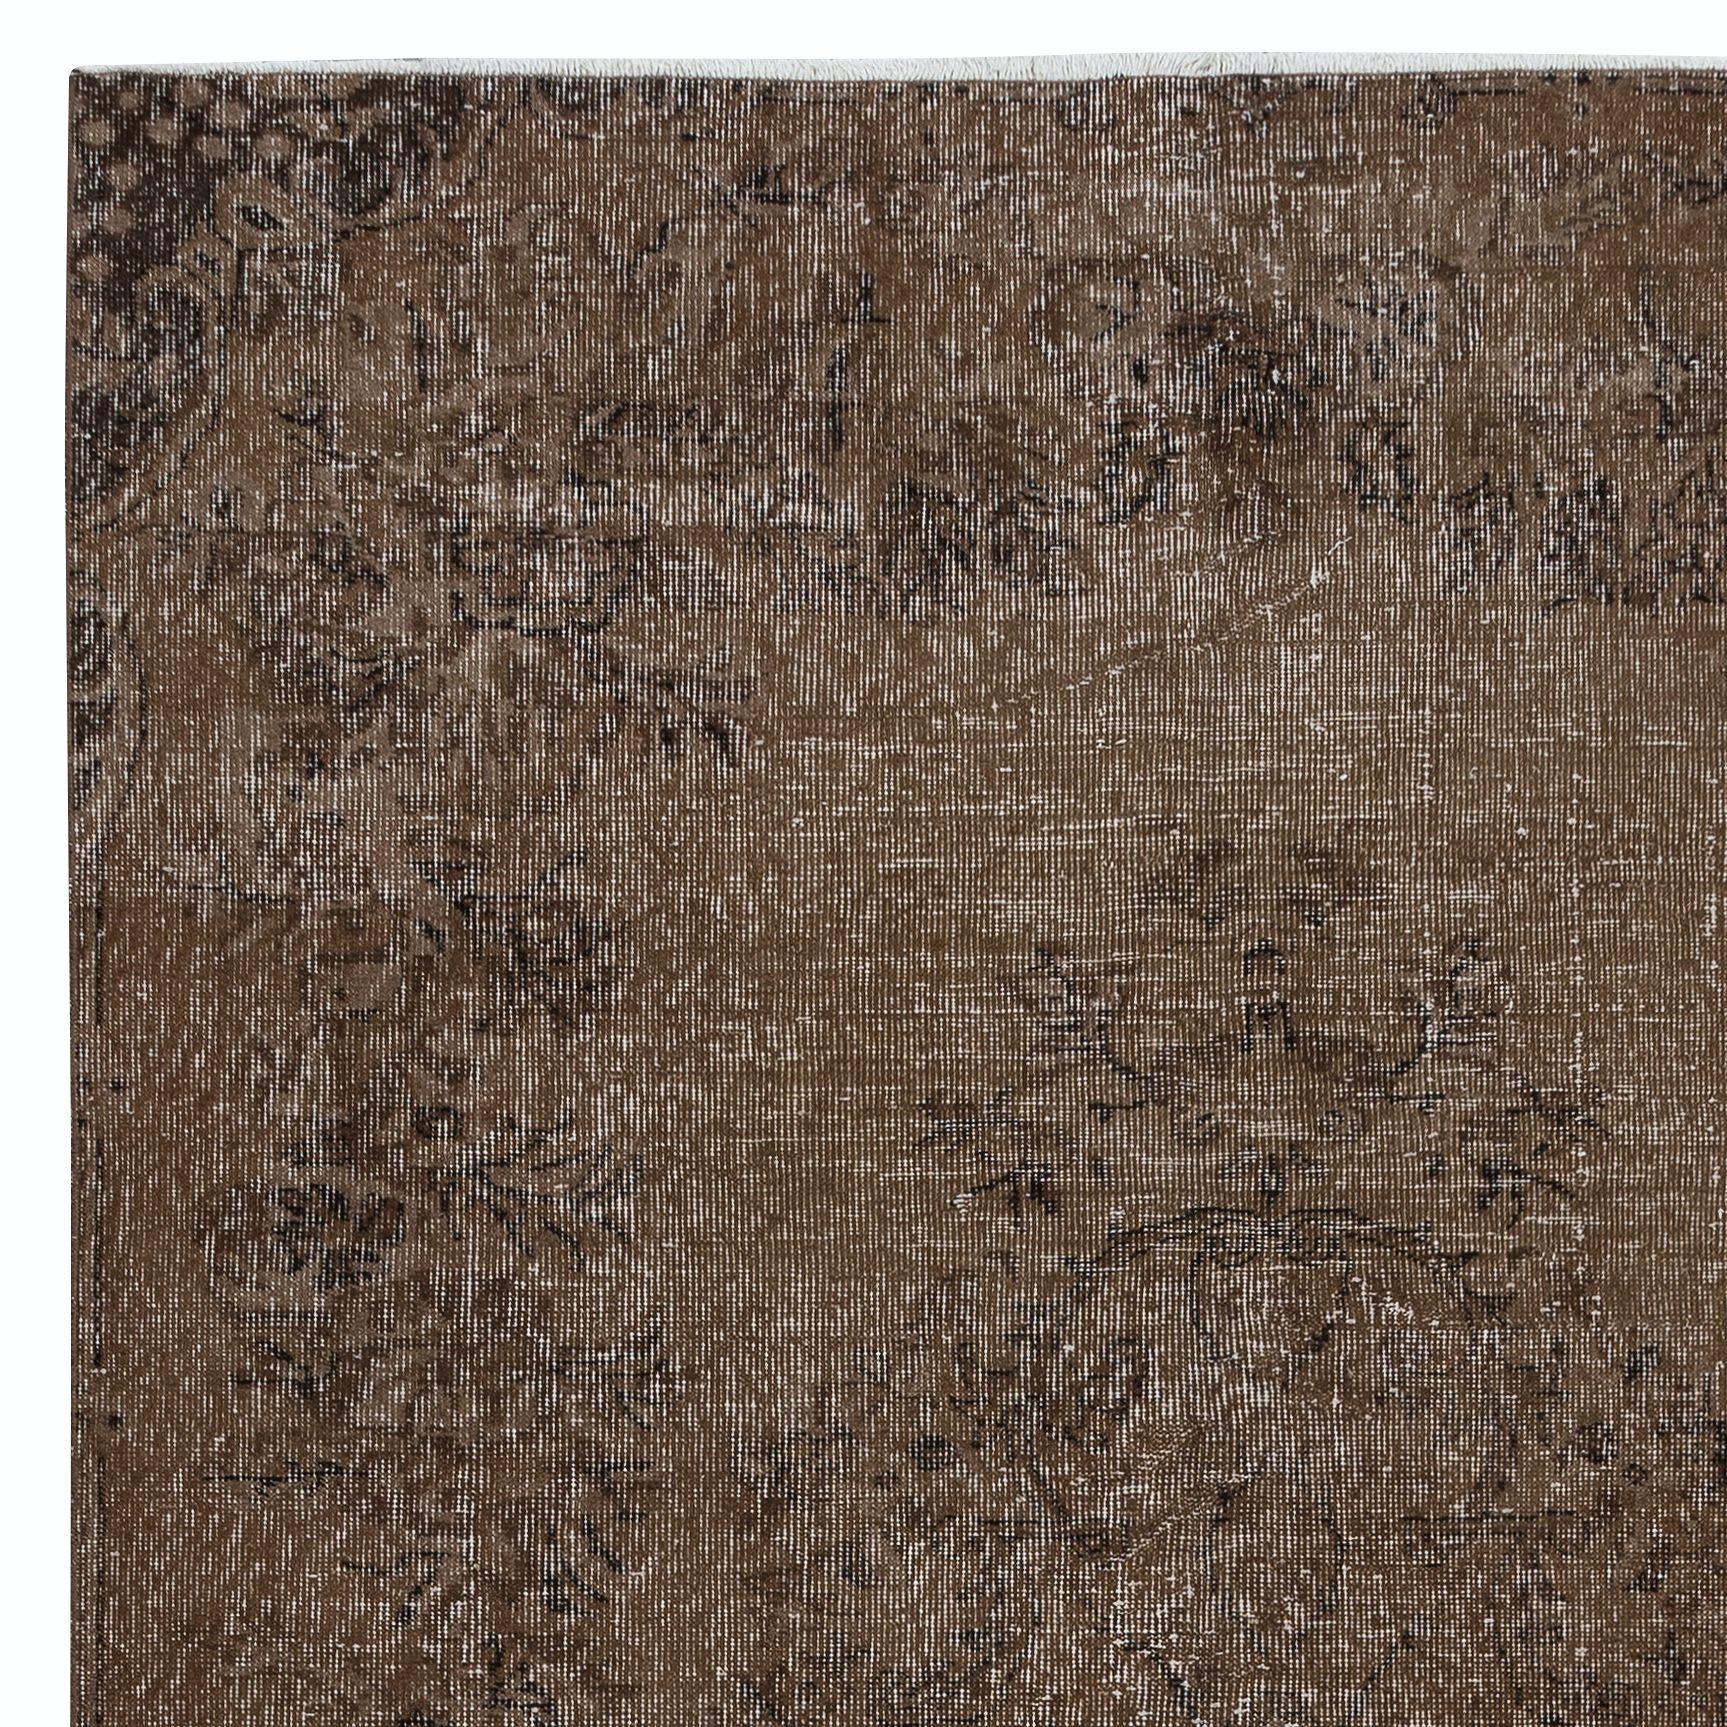 Turkish 5.7x9.6 Ft Vintage Area Rug in Brown for Modern Interiors, HandKnotted in Turkey For Sale